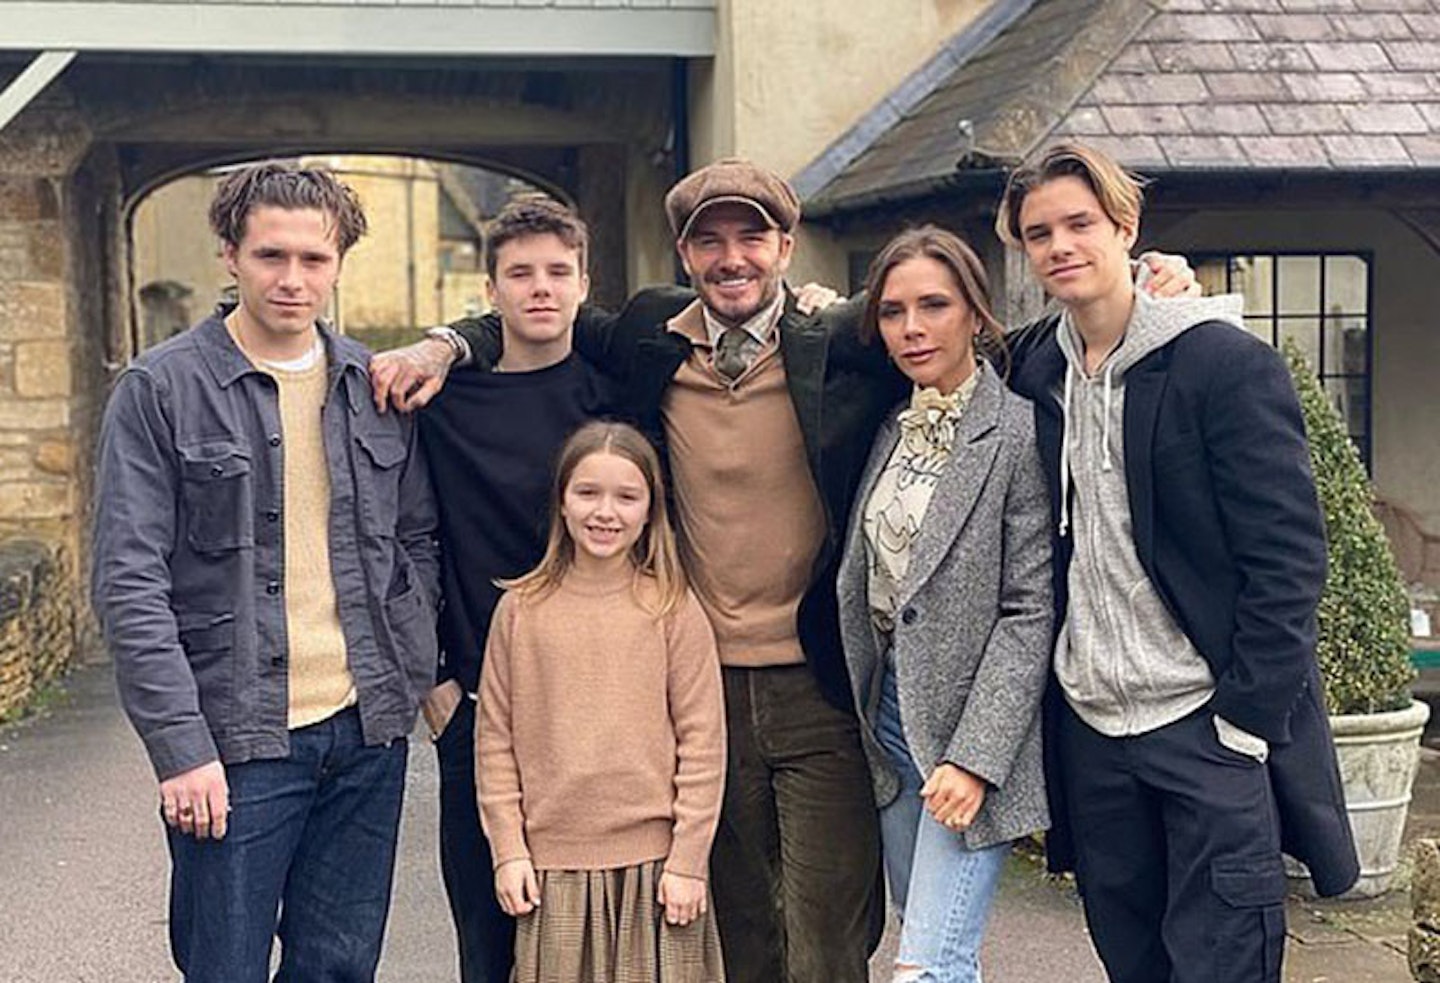 David Beckham Has Cooking Competitions With His Son Brooklyn